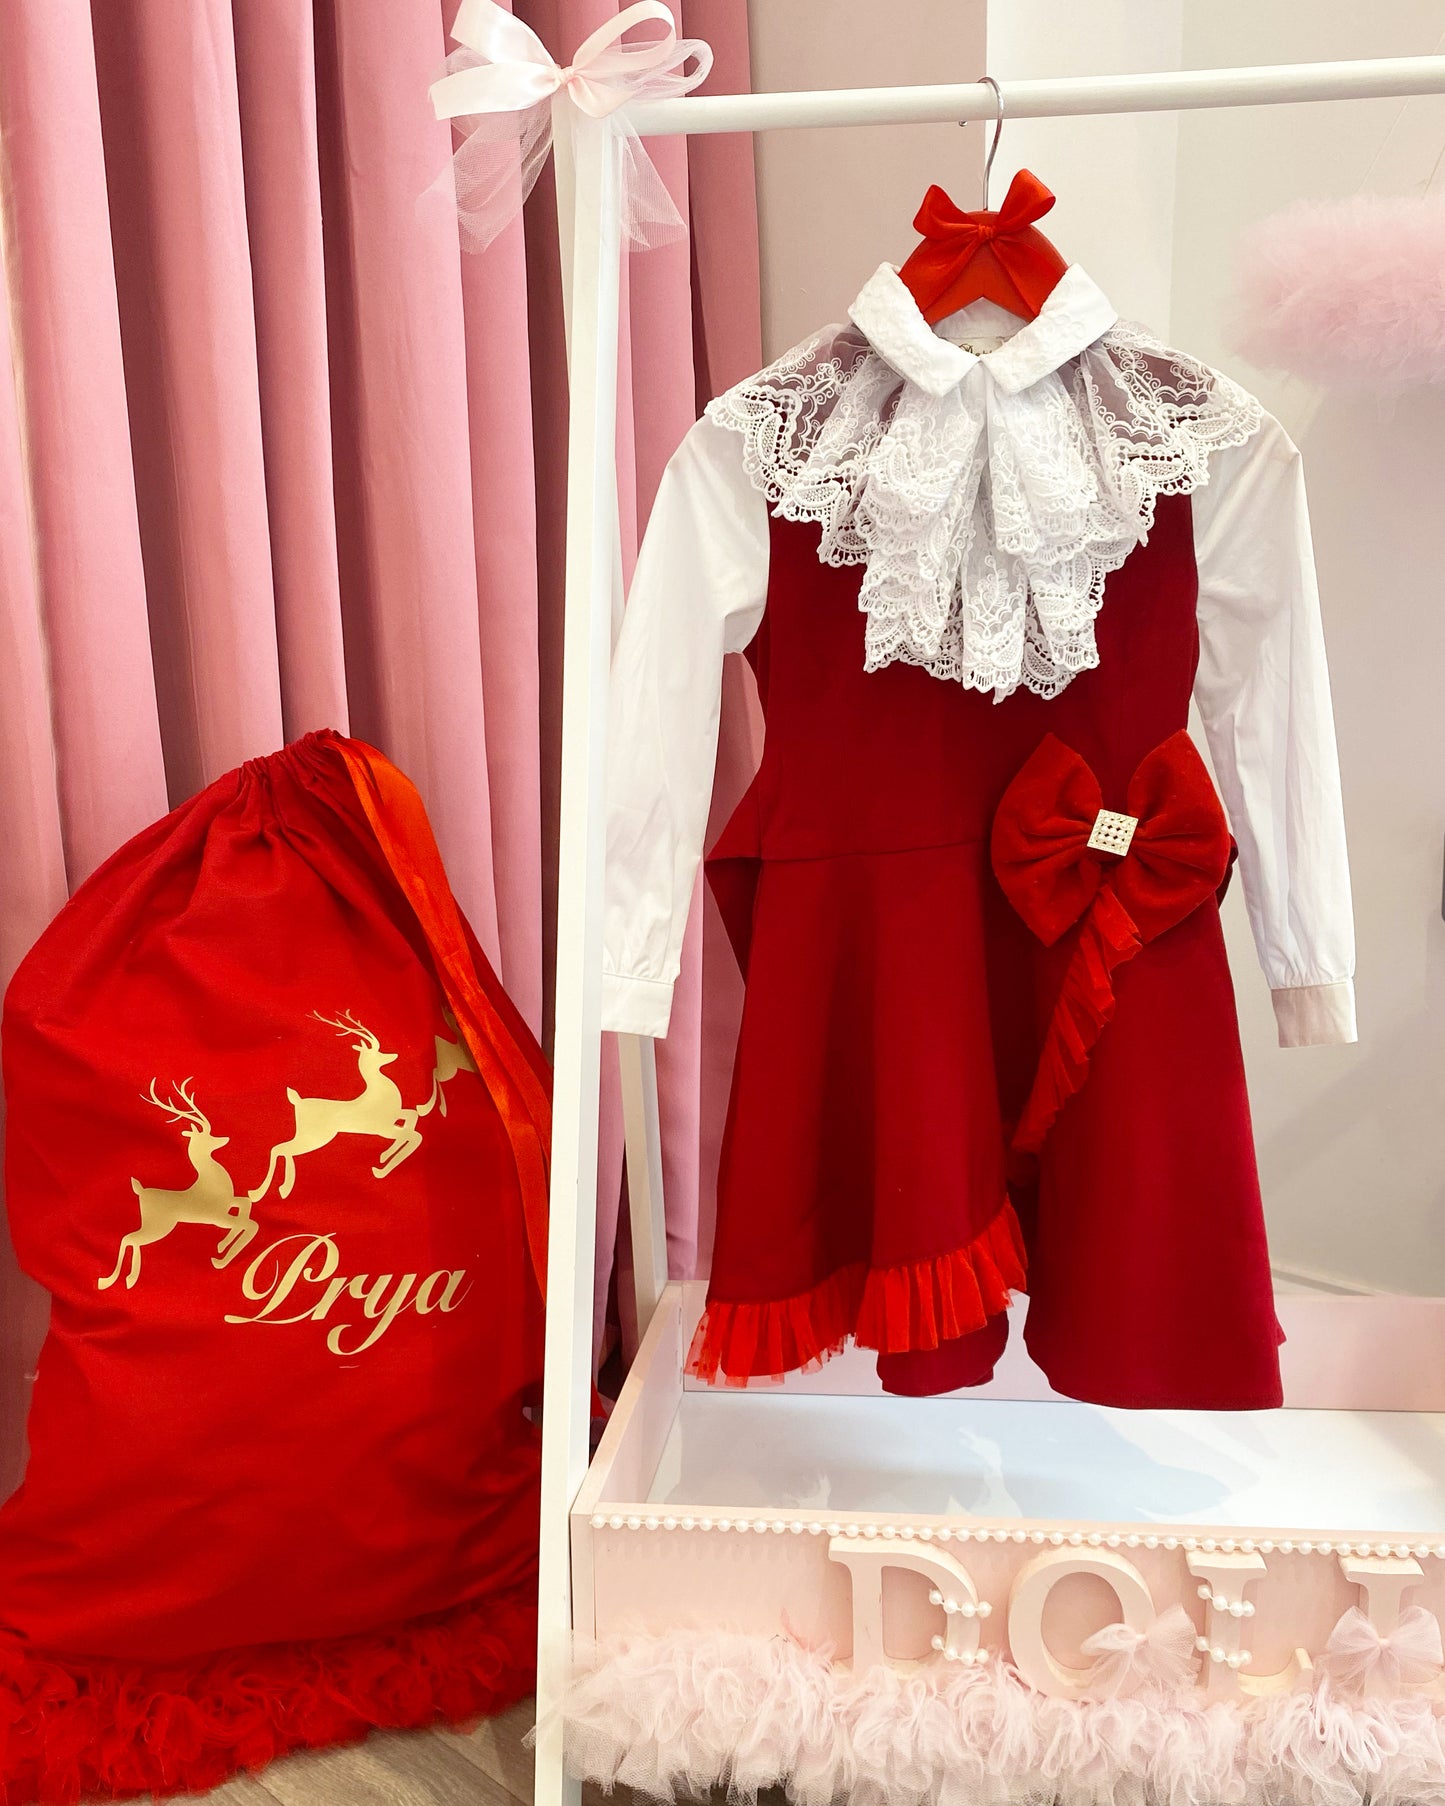 DIANA RED & WHITE LACE COLLAR DRESS 2-3 WEEKS